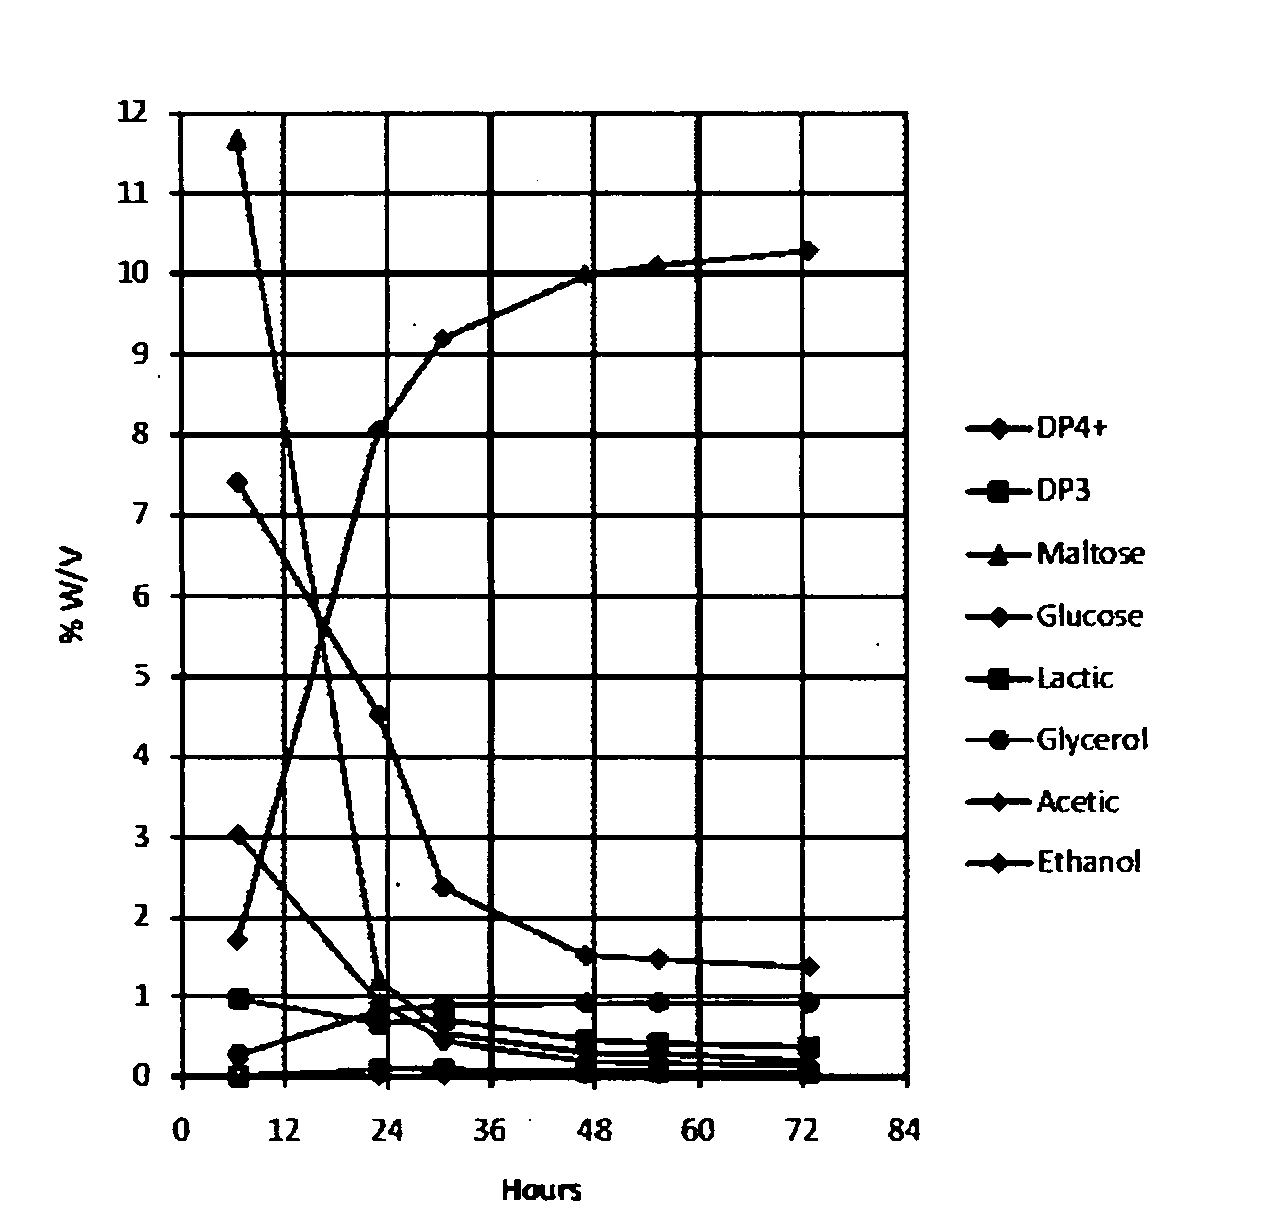 Pretreatment of grain slurry with alpha-amylase and a hemicellulase blend prior to liquefaction